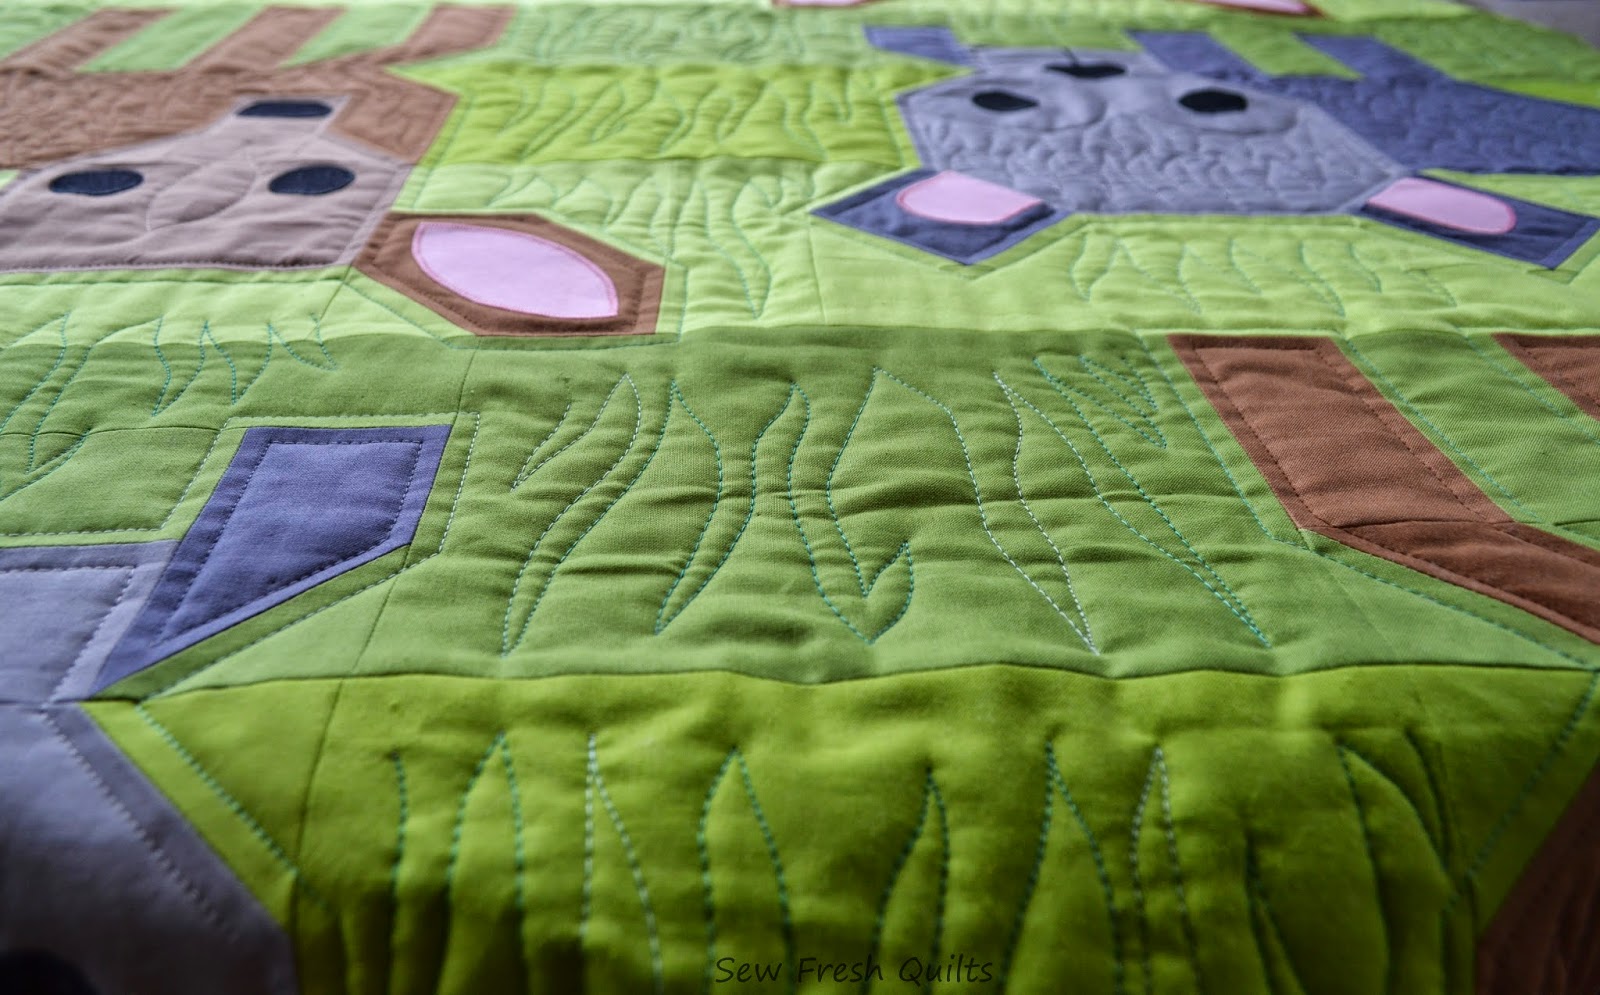 http://sewfreshquilts.blogspot.ca/2014/10/wild-life-finished-top.html